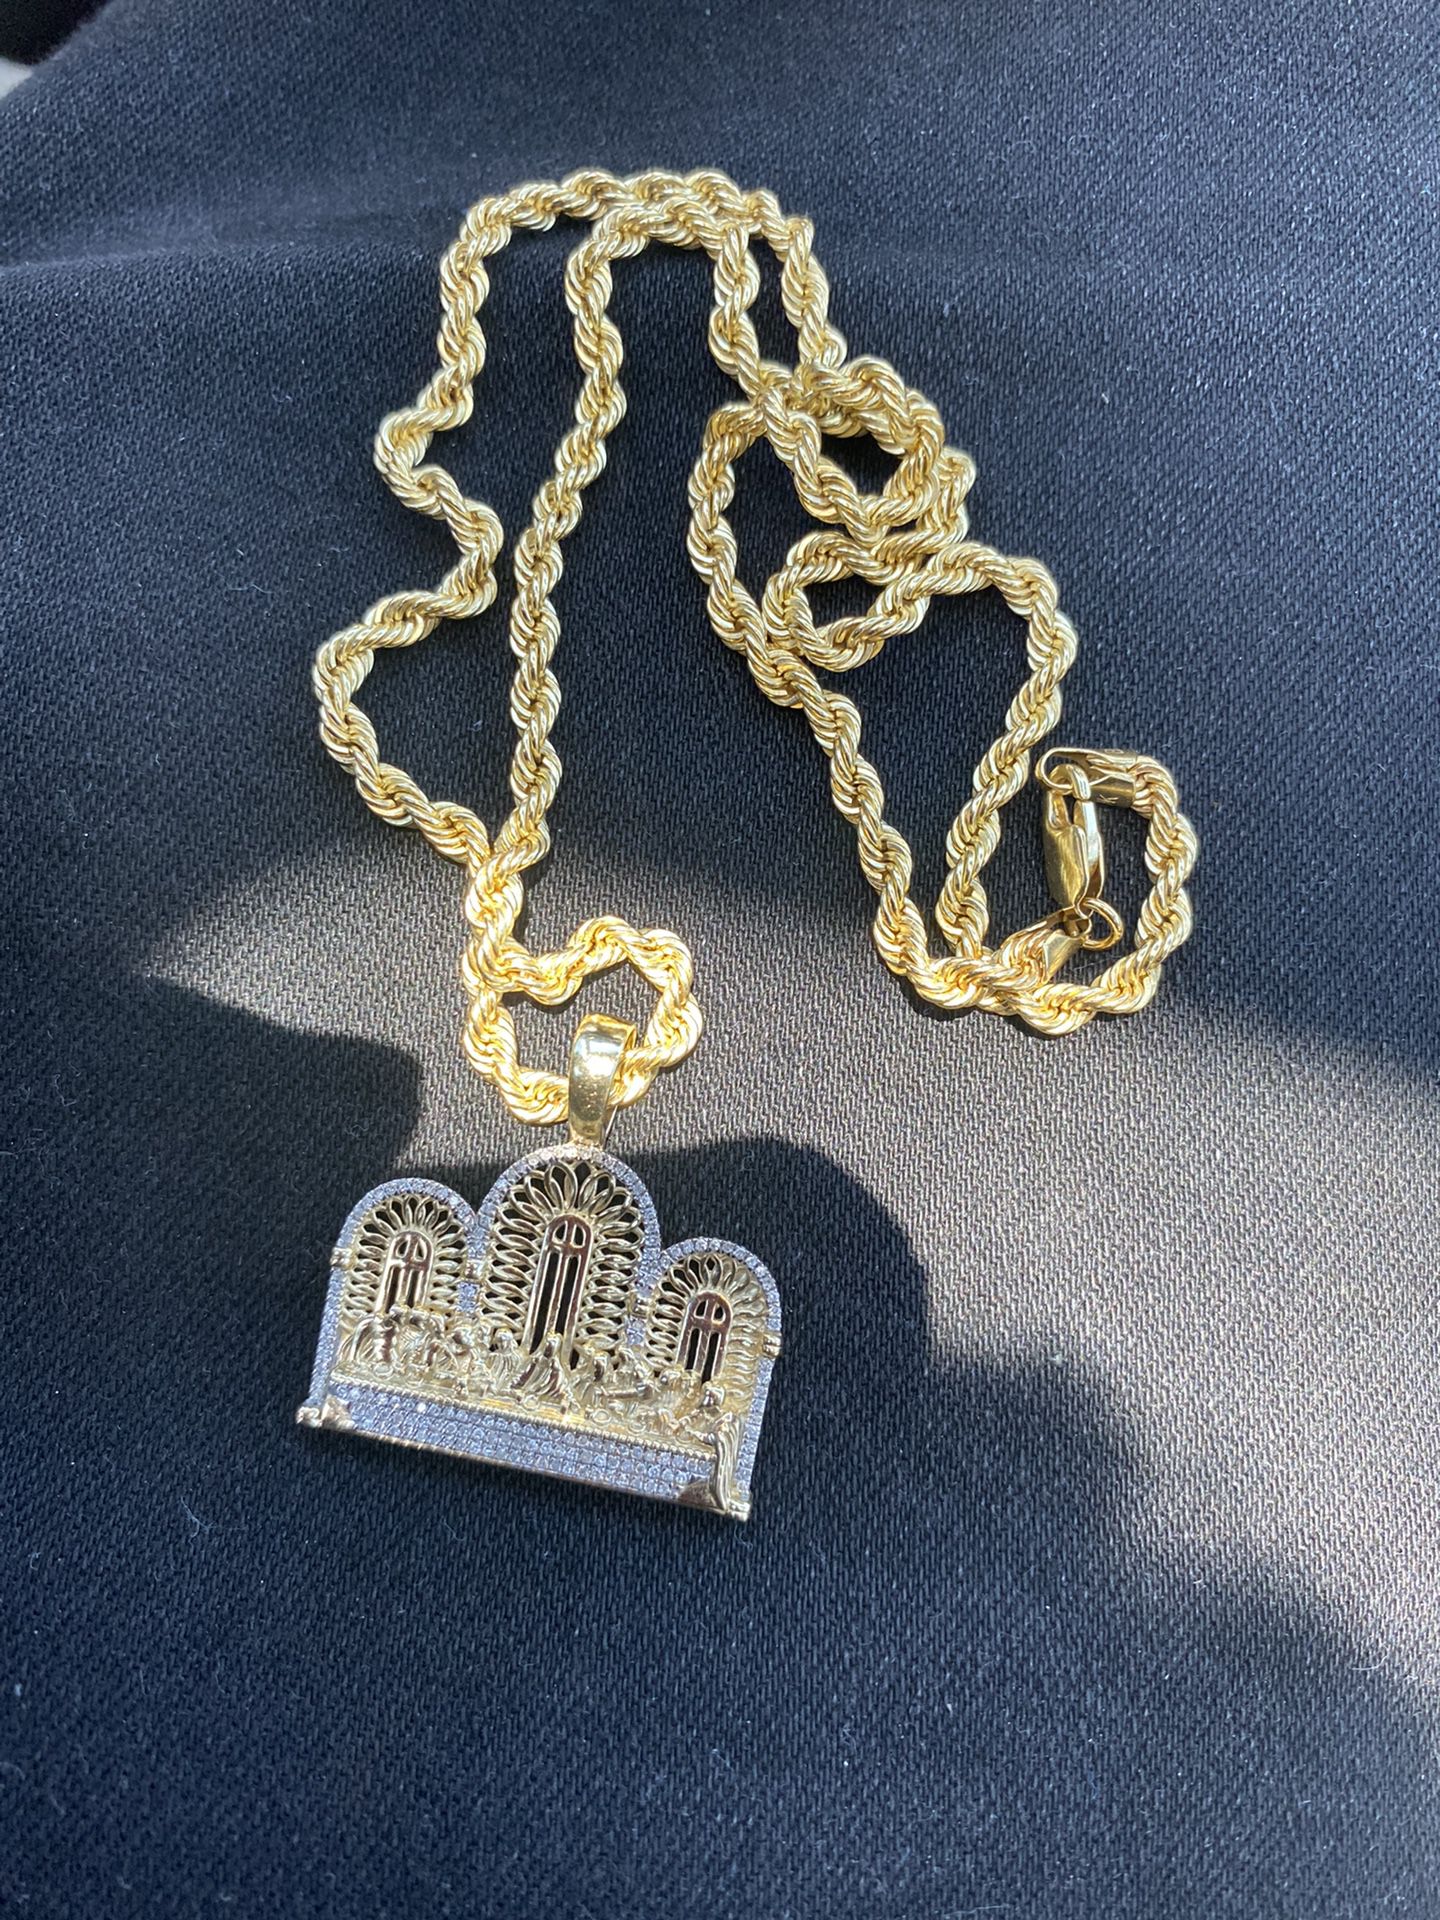 chain and pendant